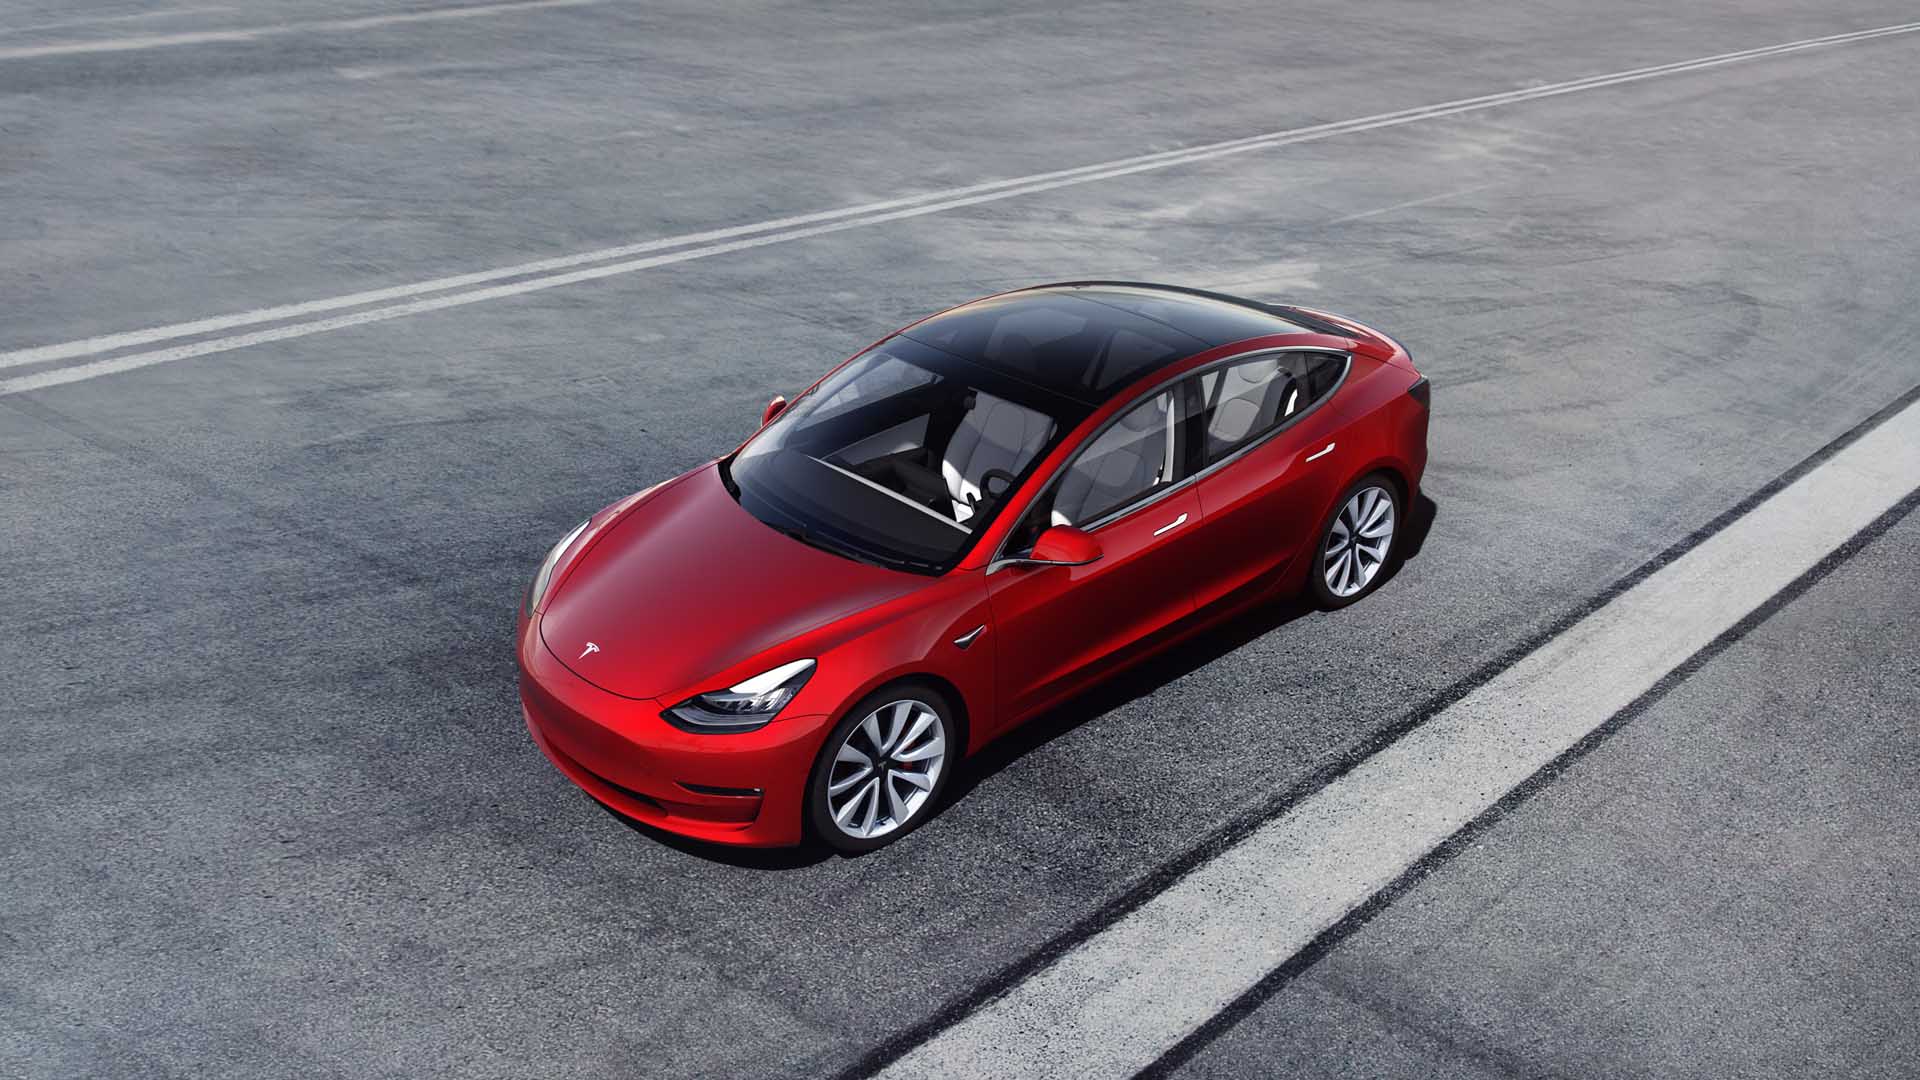 2022 Tesla Model 3: Charging to 100% can be the norm for 272-mile LFP version2022 Tesla Model 3: Charging to 100% can be the norm for 272-mile LFP version